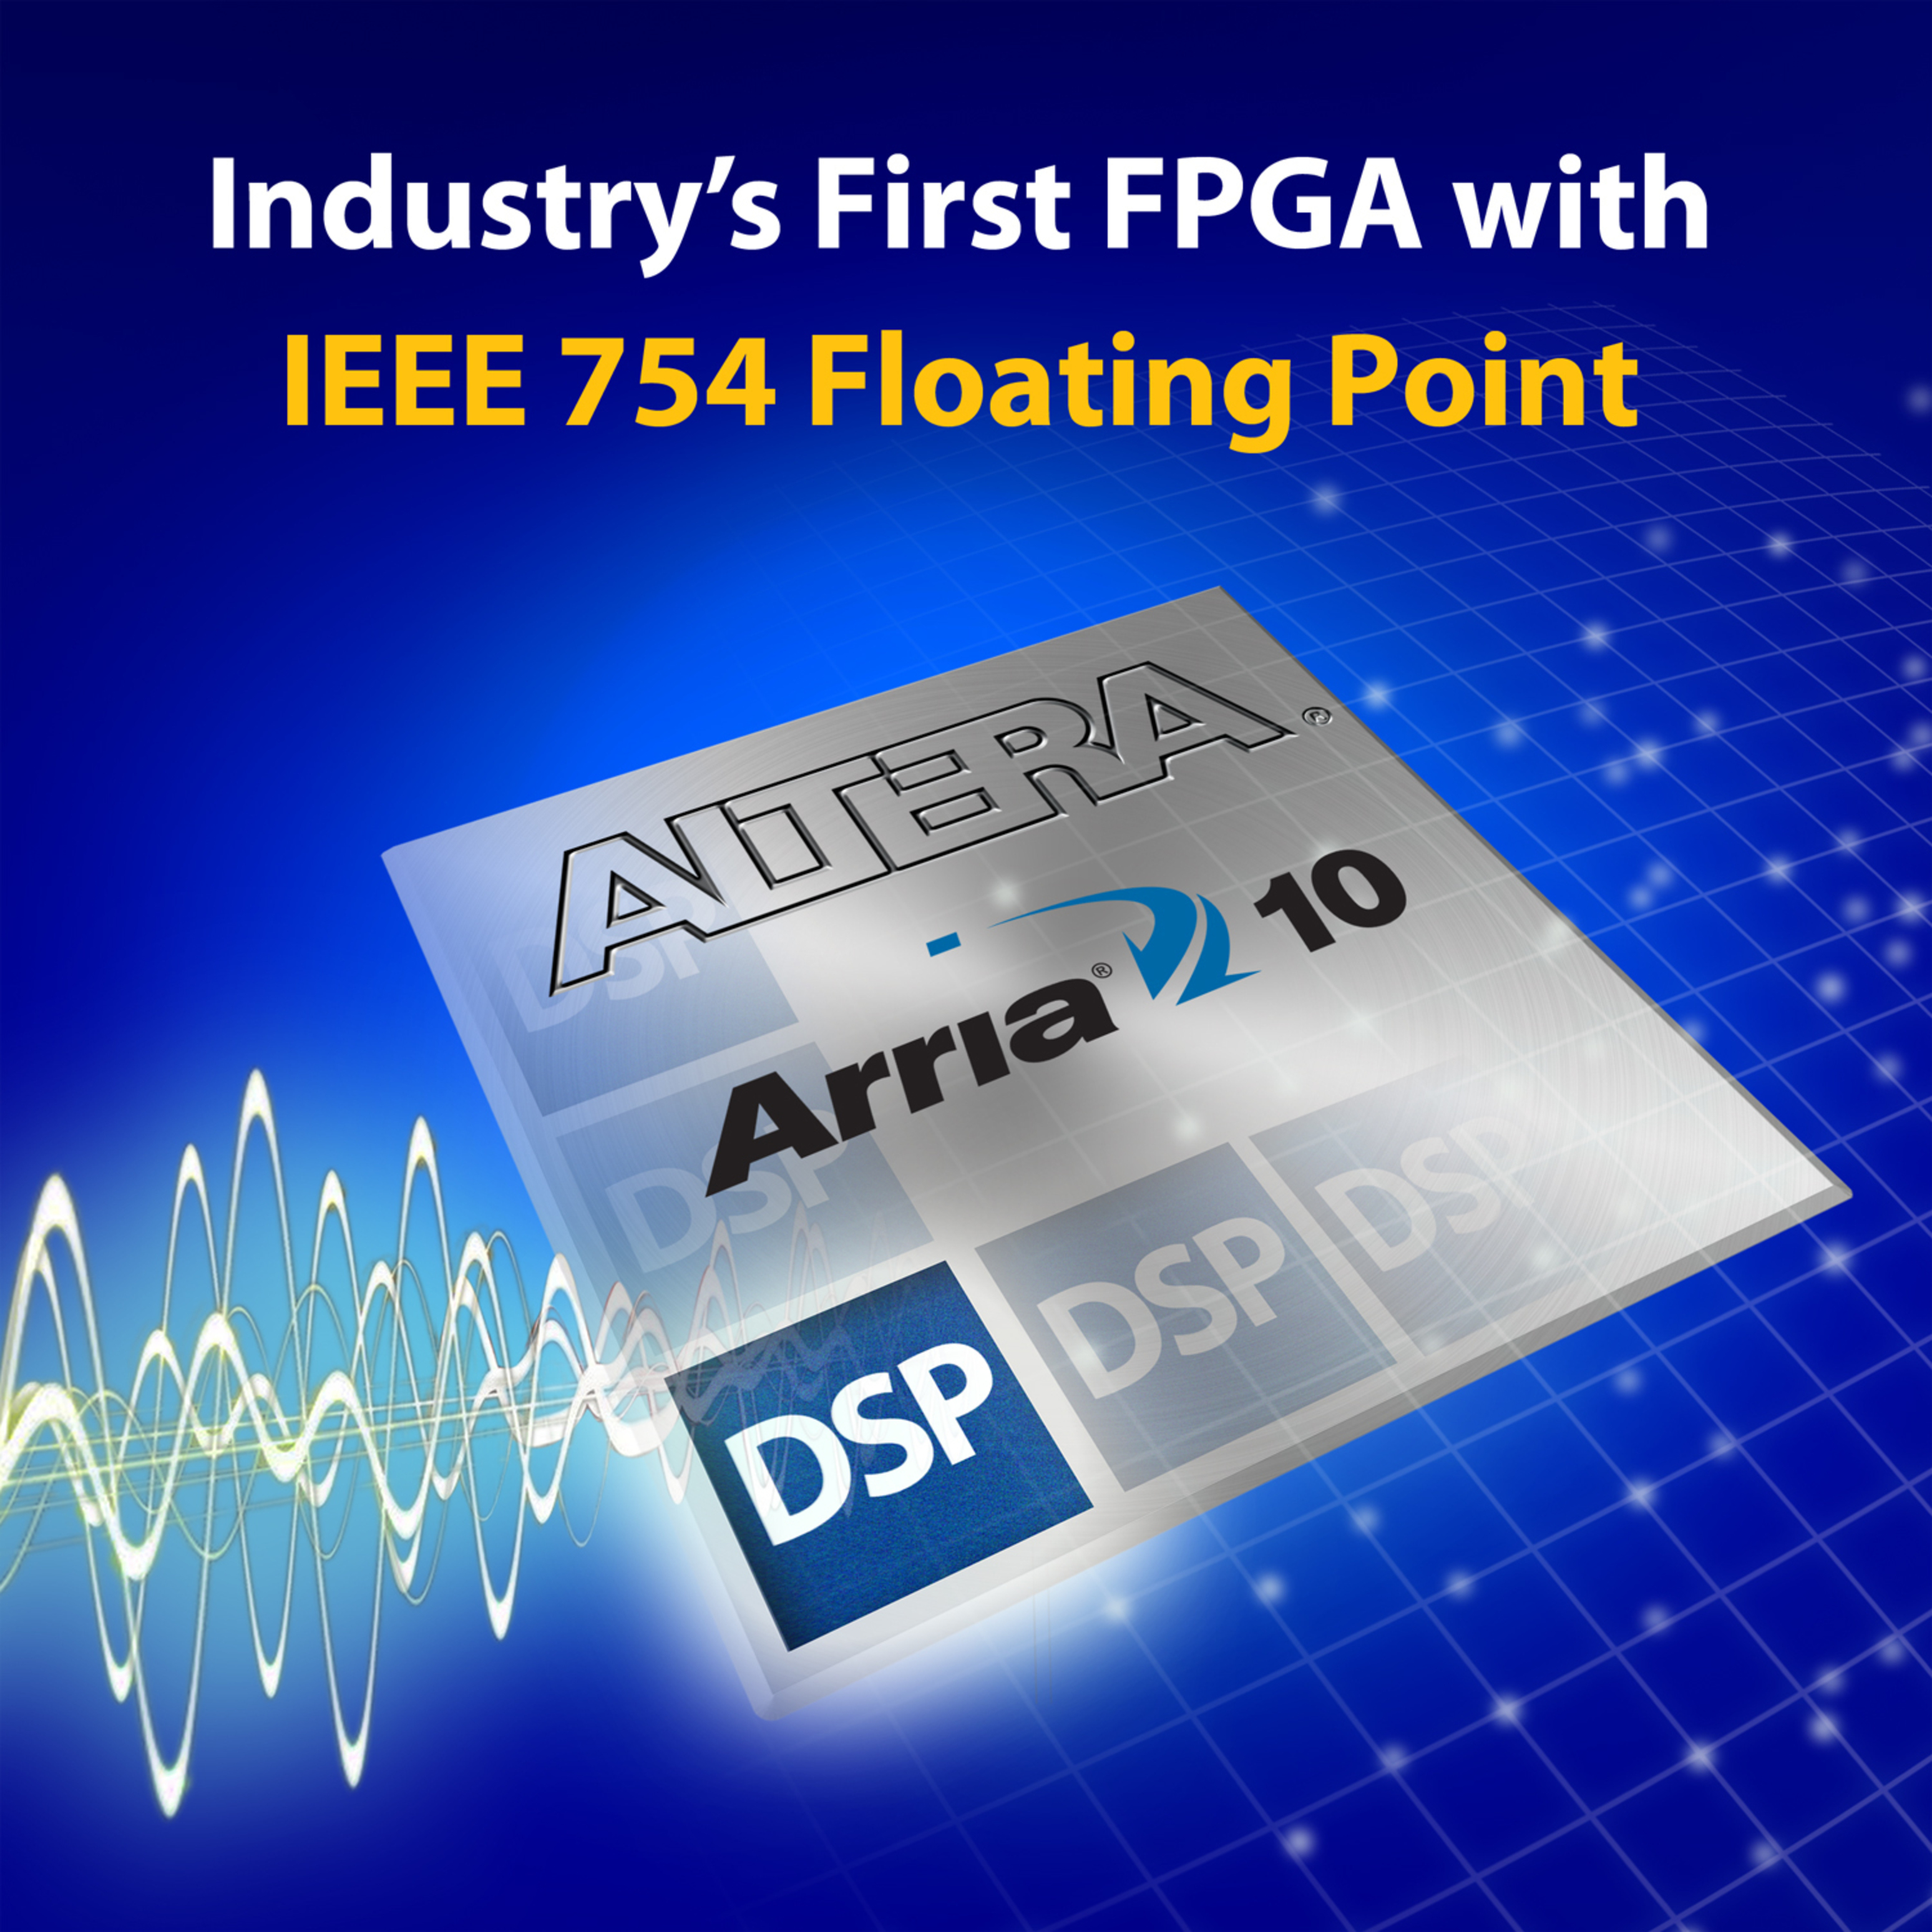 Arria 10 FPGAs and SoCs Deliver up to 1.5 TeraFLOPs of DSP Performance (PRNewsFoto/Altera Corporation)